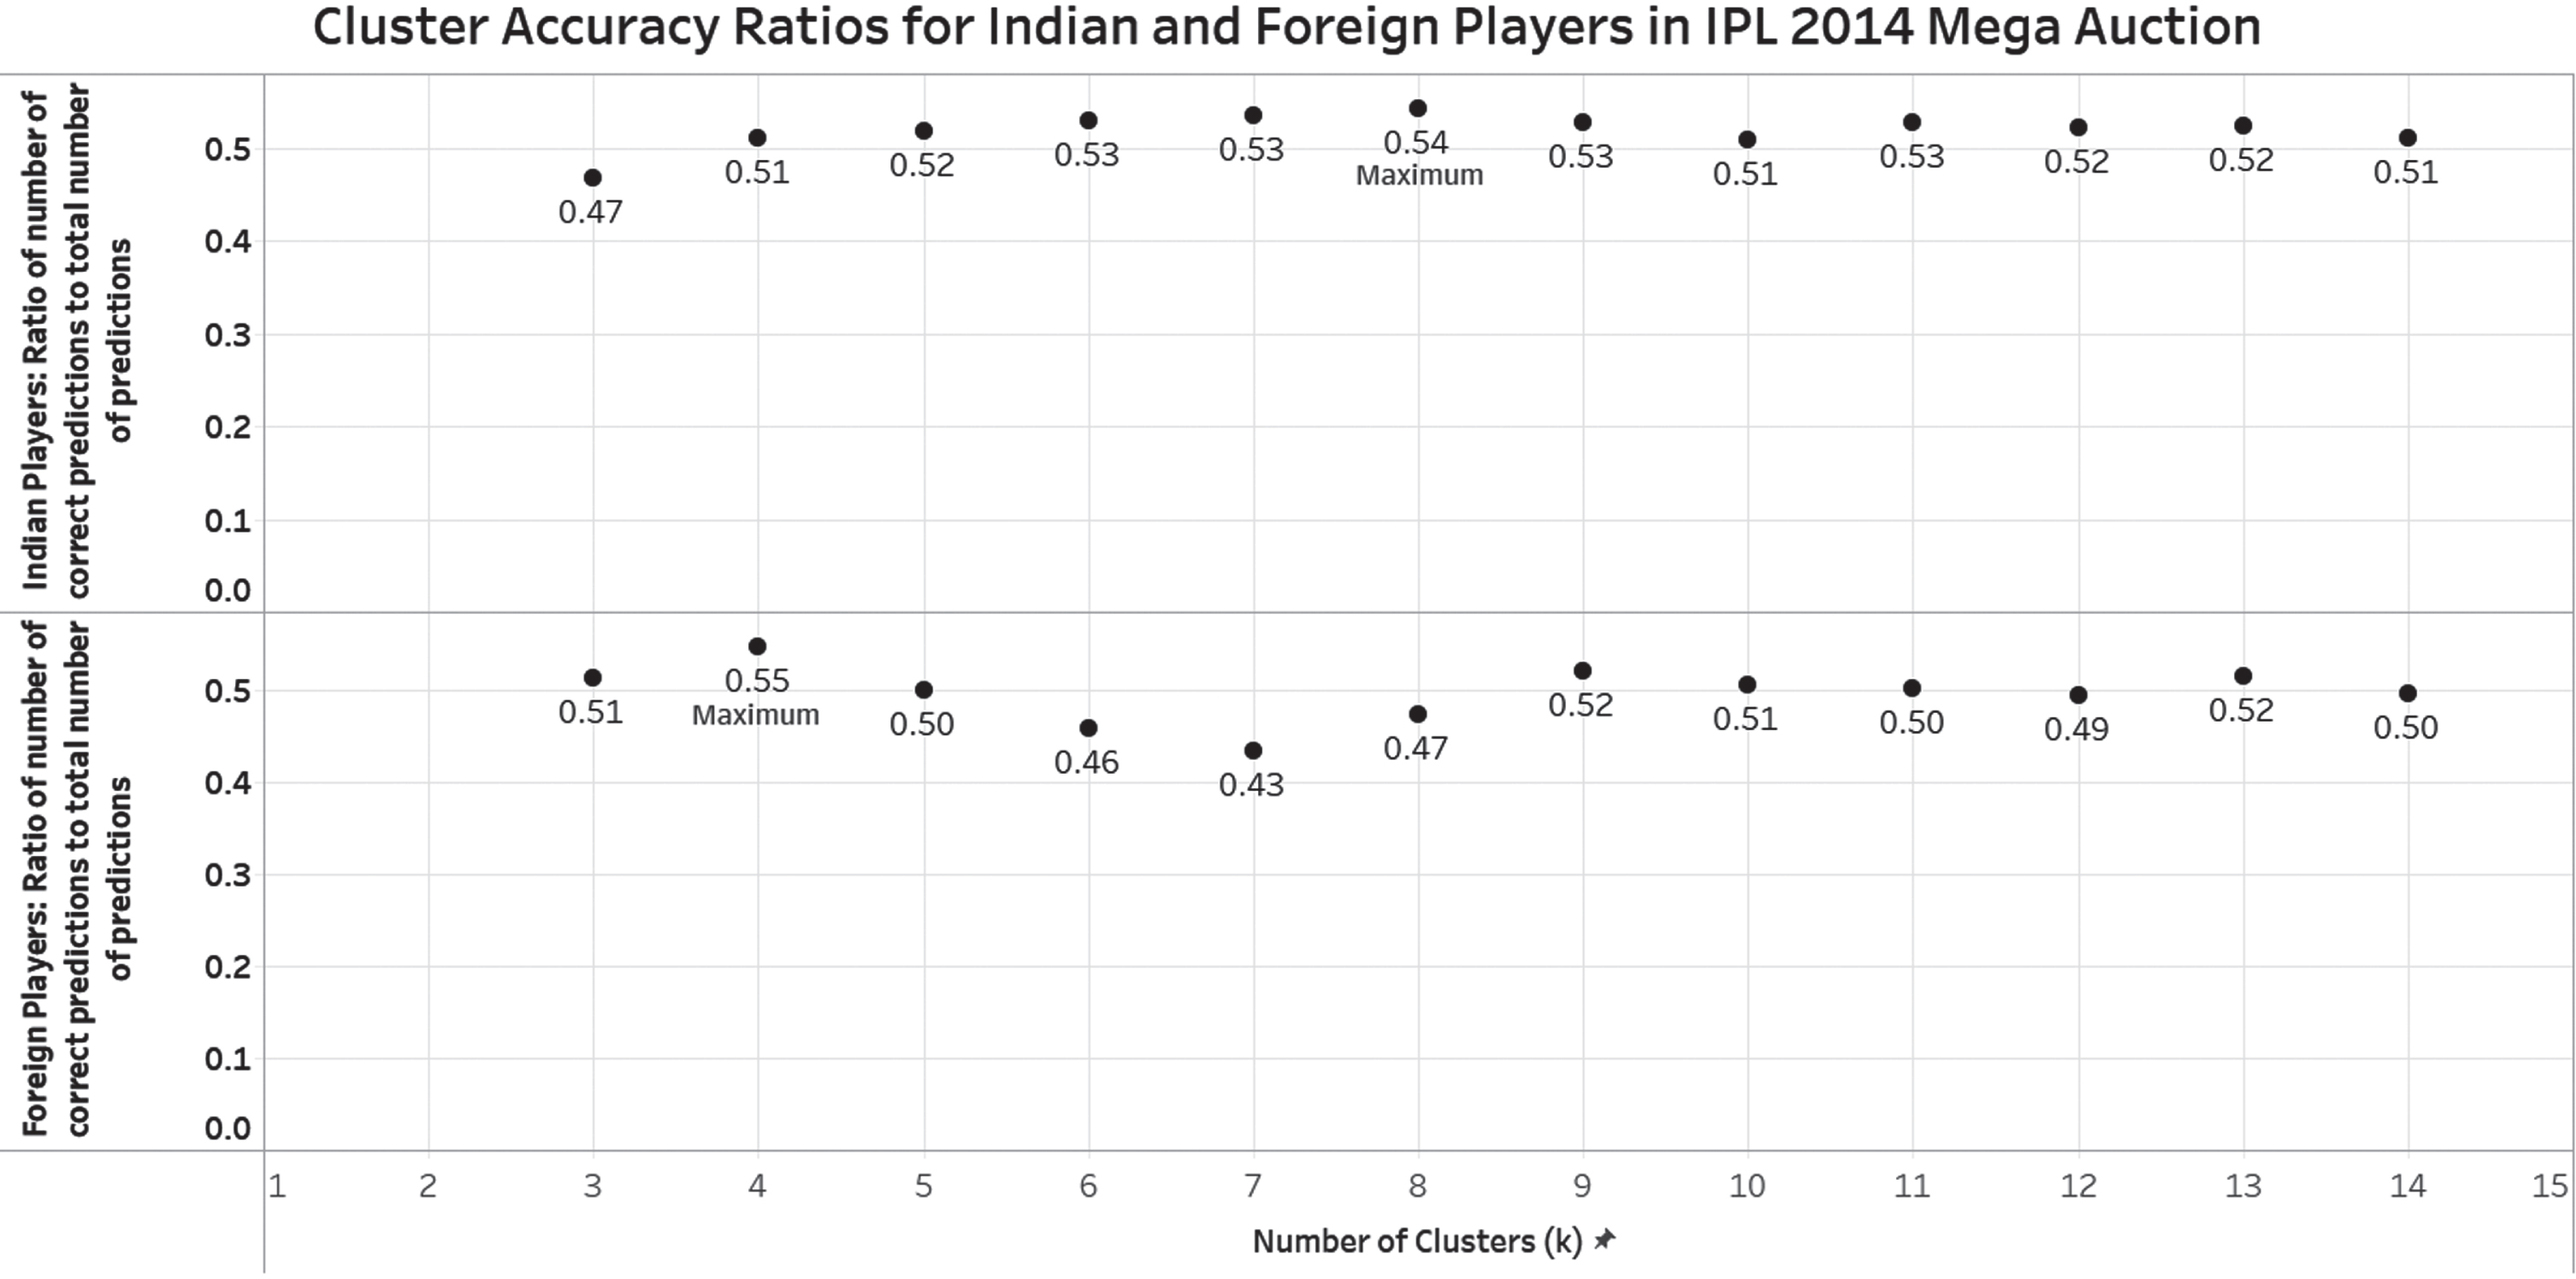 Cluster accuracy ratios for Indian and Foreign players in 2014 IPL mega auction.